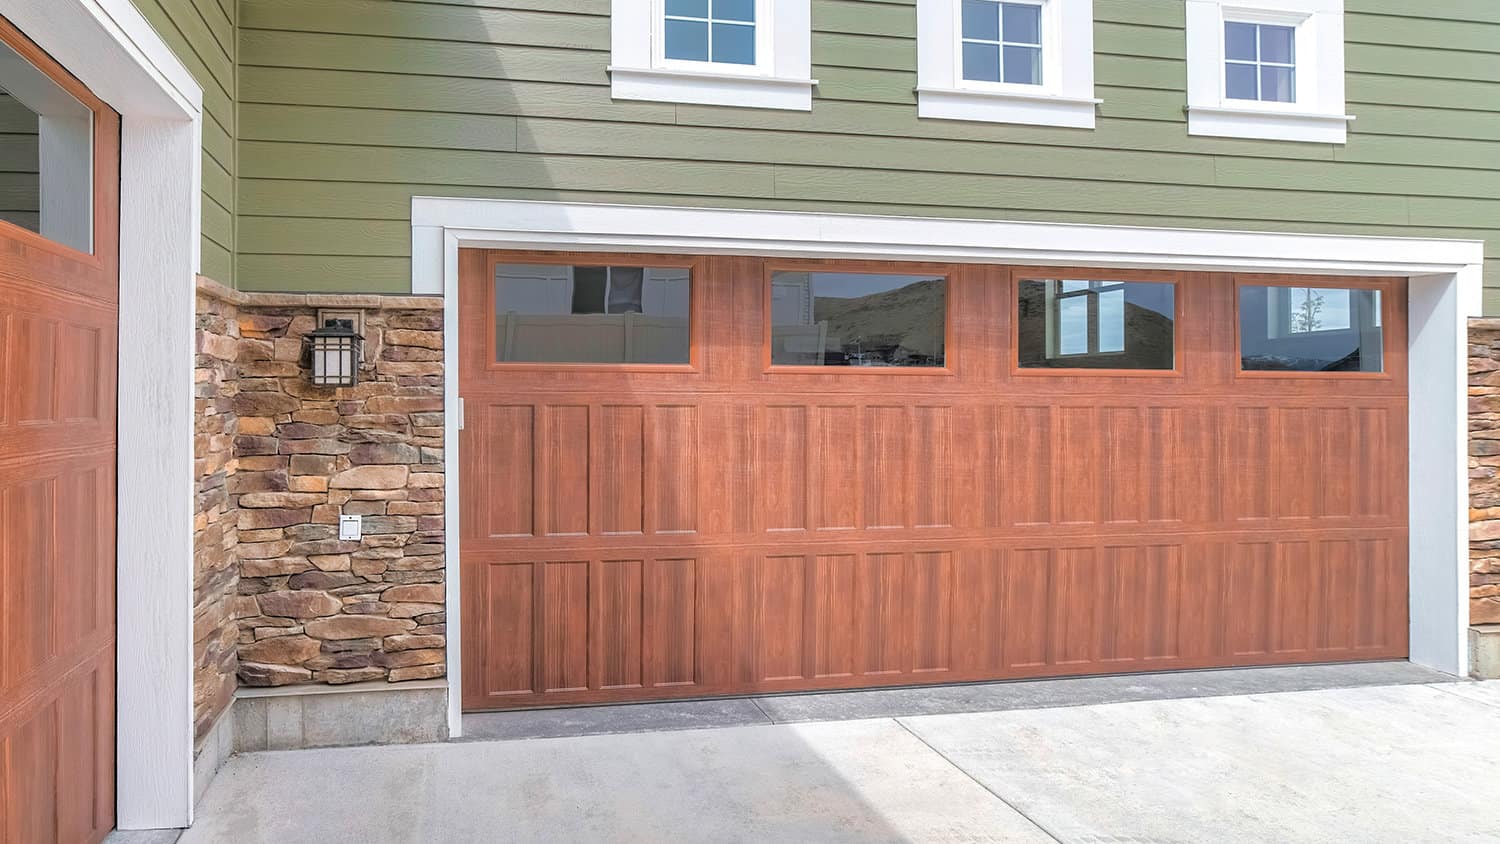 Panorama wooden garage doors with window panels and wall lamp